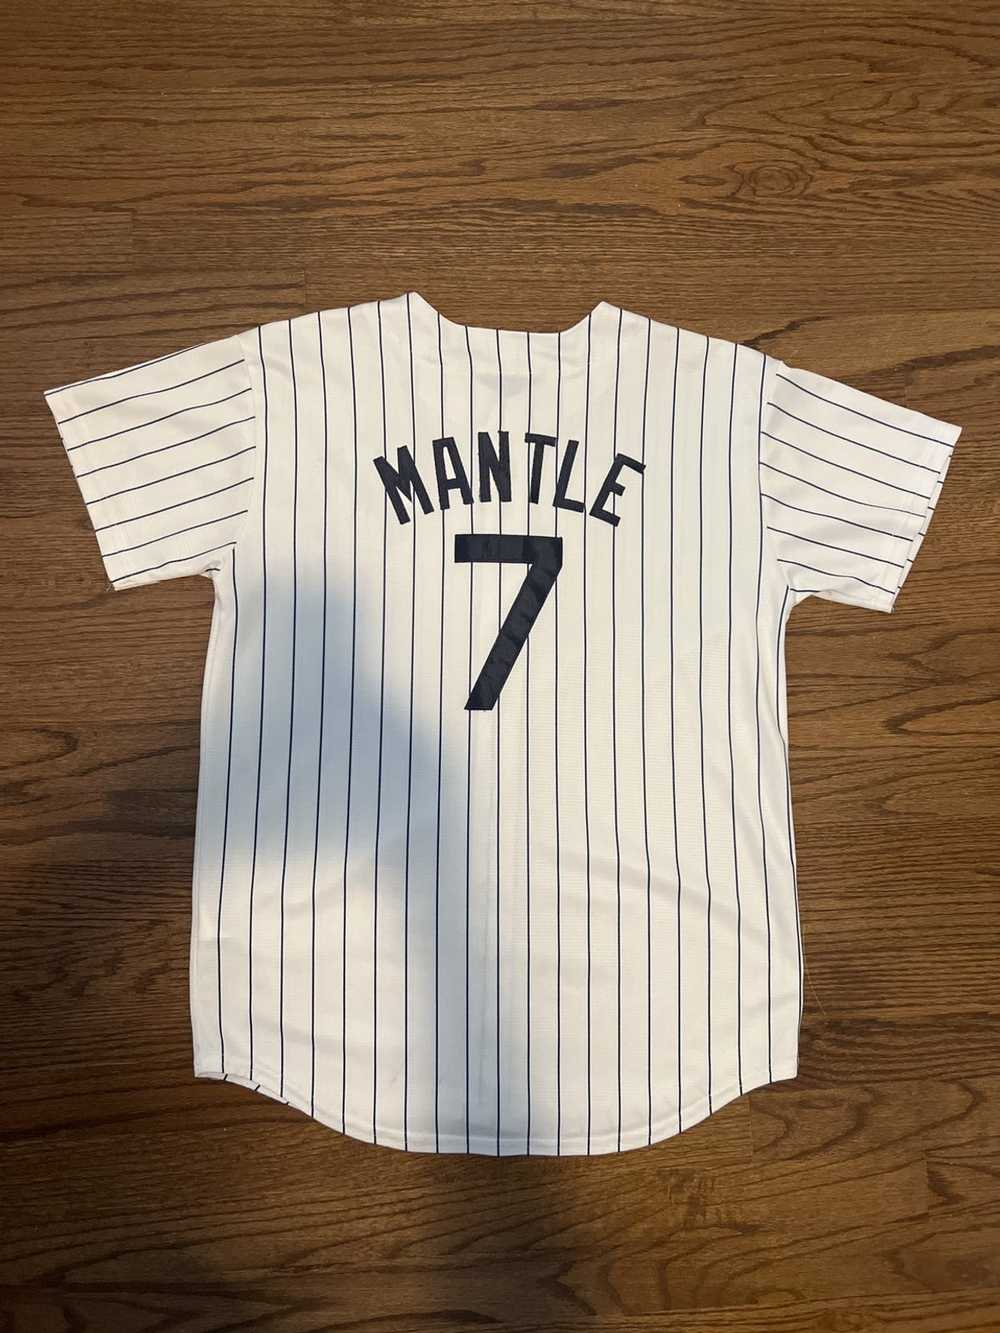 Cooperstown Collection Mickey Mantle - image 3